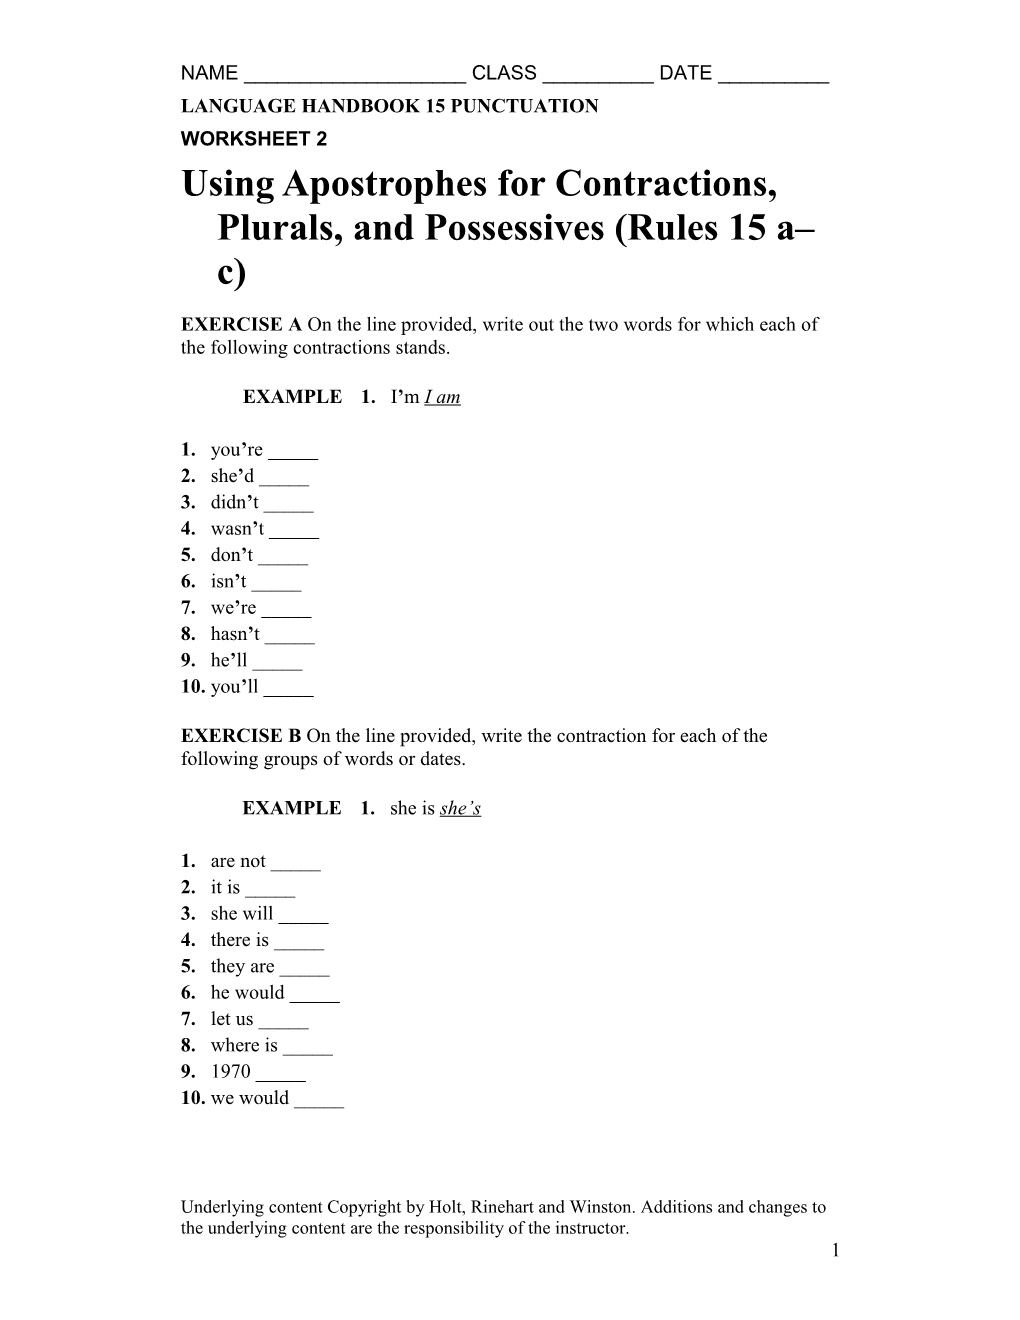 Using Apostrophes for Contractions, Plurals, and Possessives (Rules 15 a C)